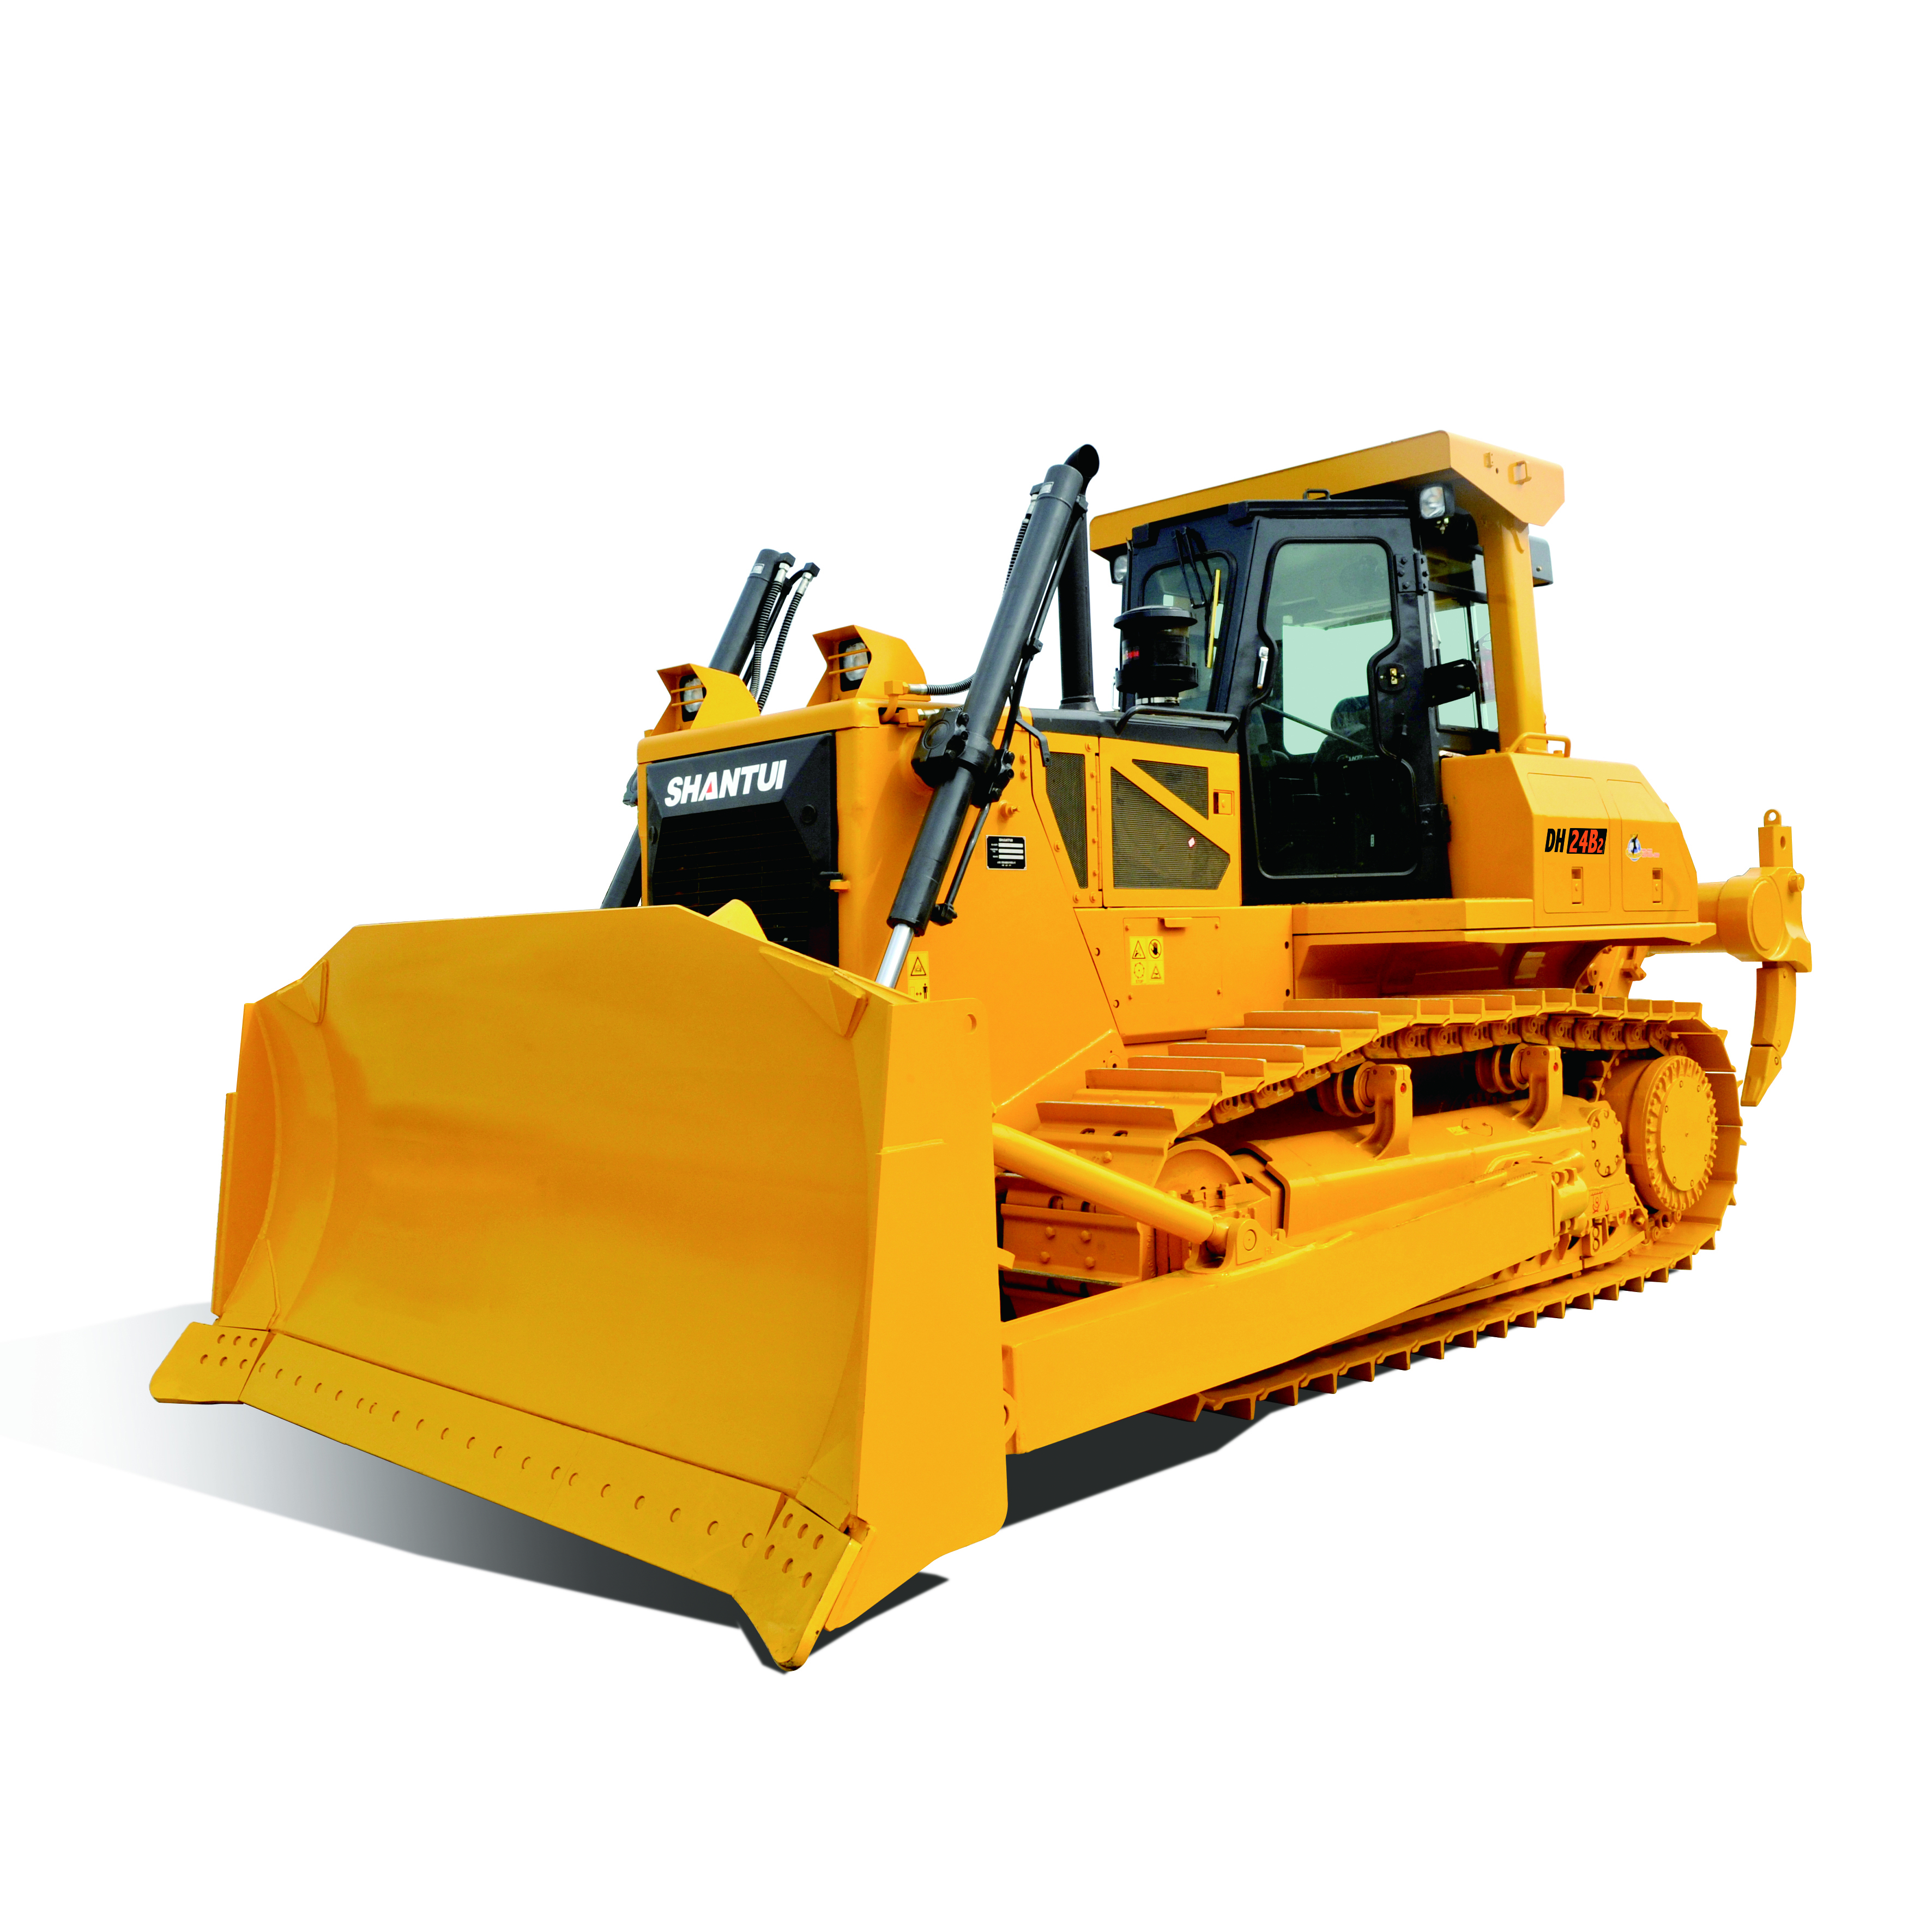 New Delivery for Track Bulldozer - Shantui 24ton Bulldozer 240Hp Dh24-b2 With Rear Ripper – China Construction